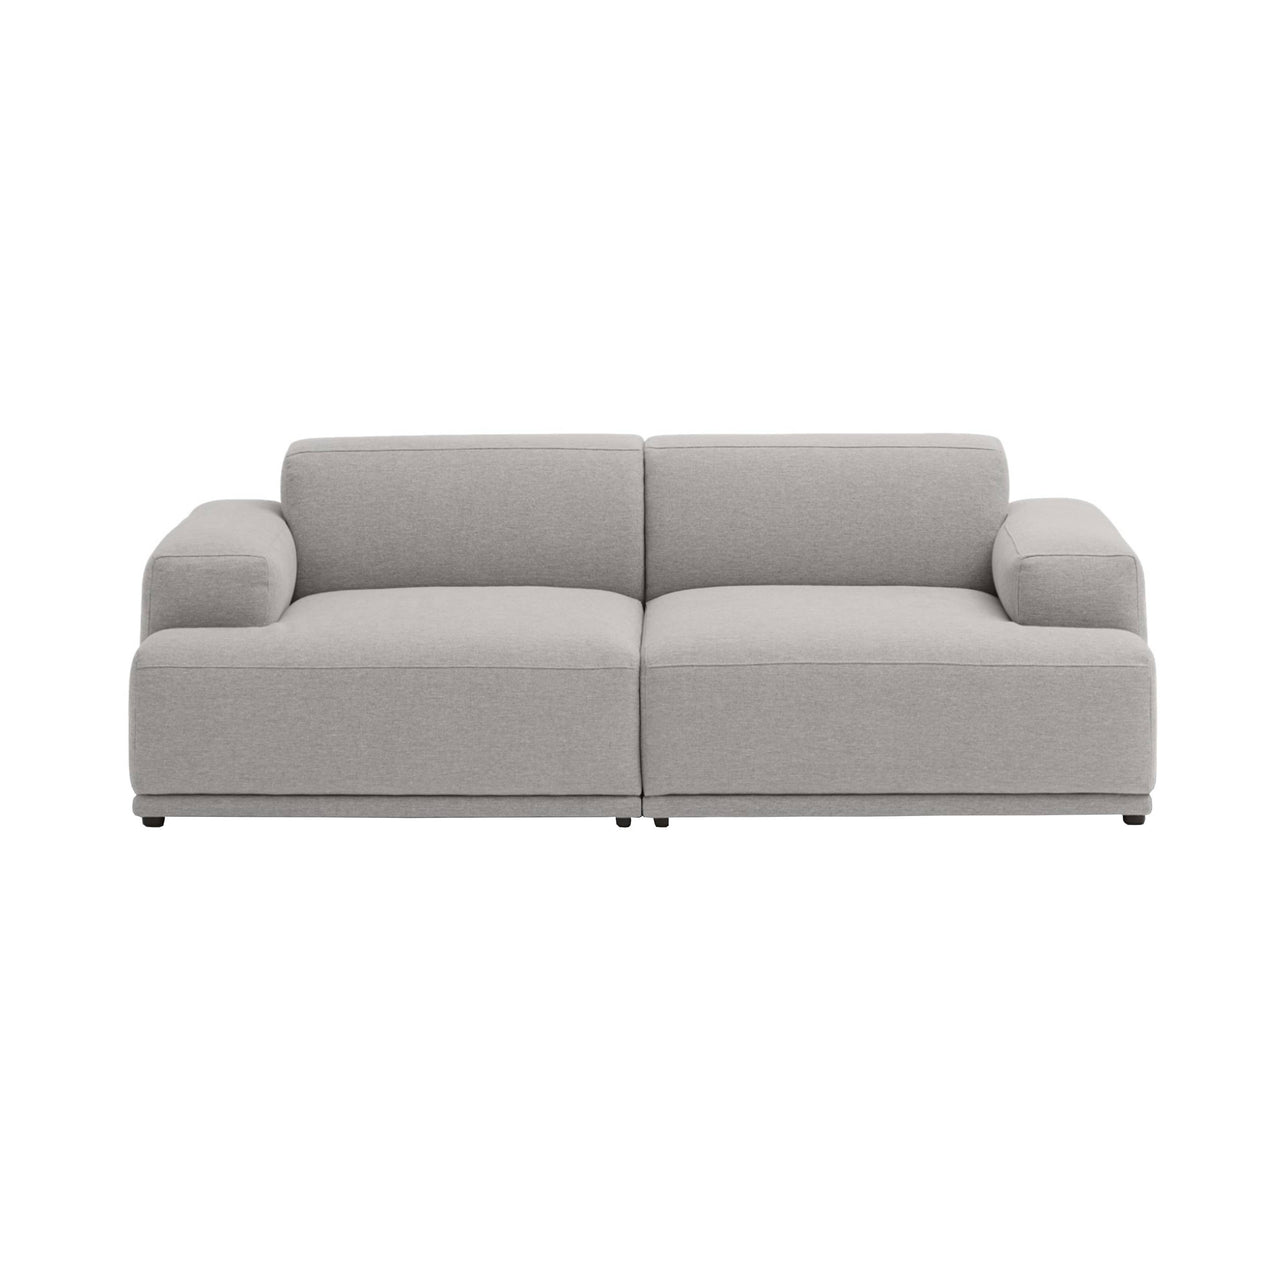 Connect Soft Modular Sofa: 2 Seater + Configuration 1 + Clay 12